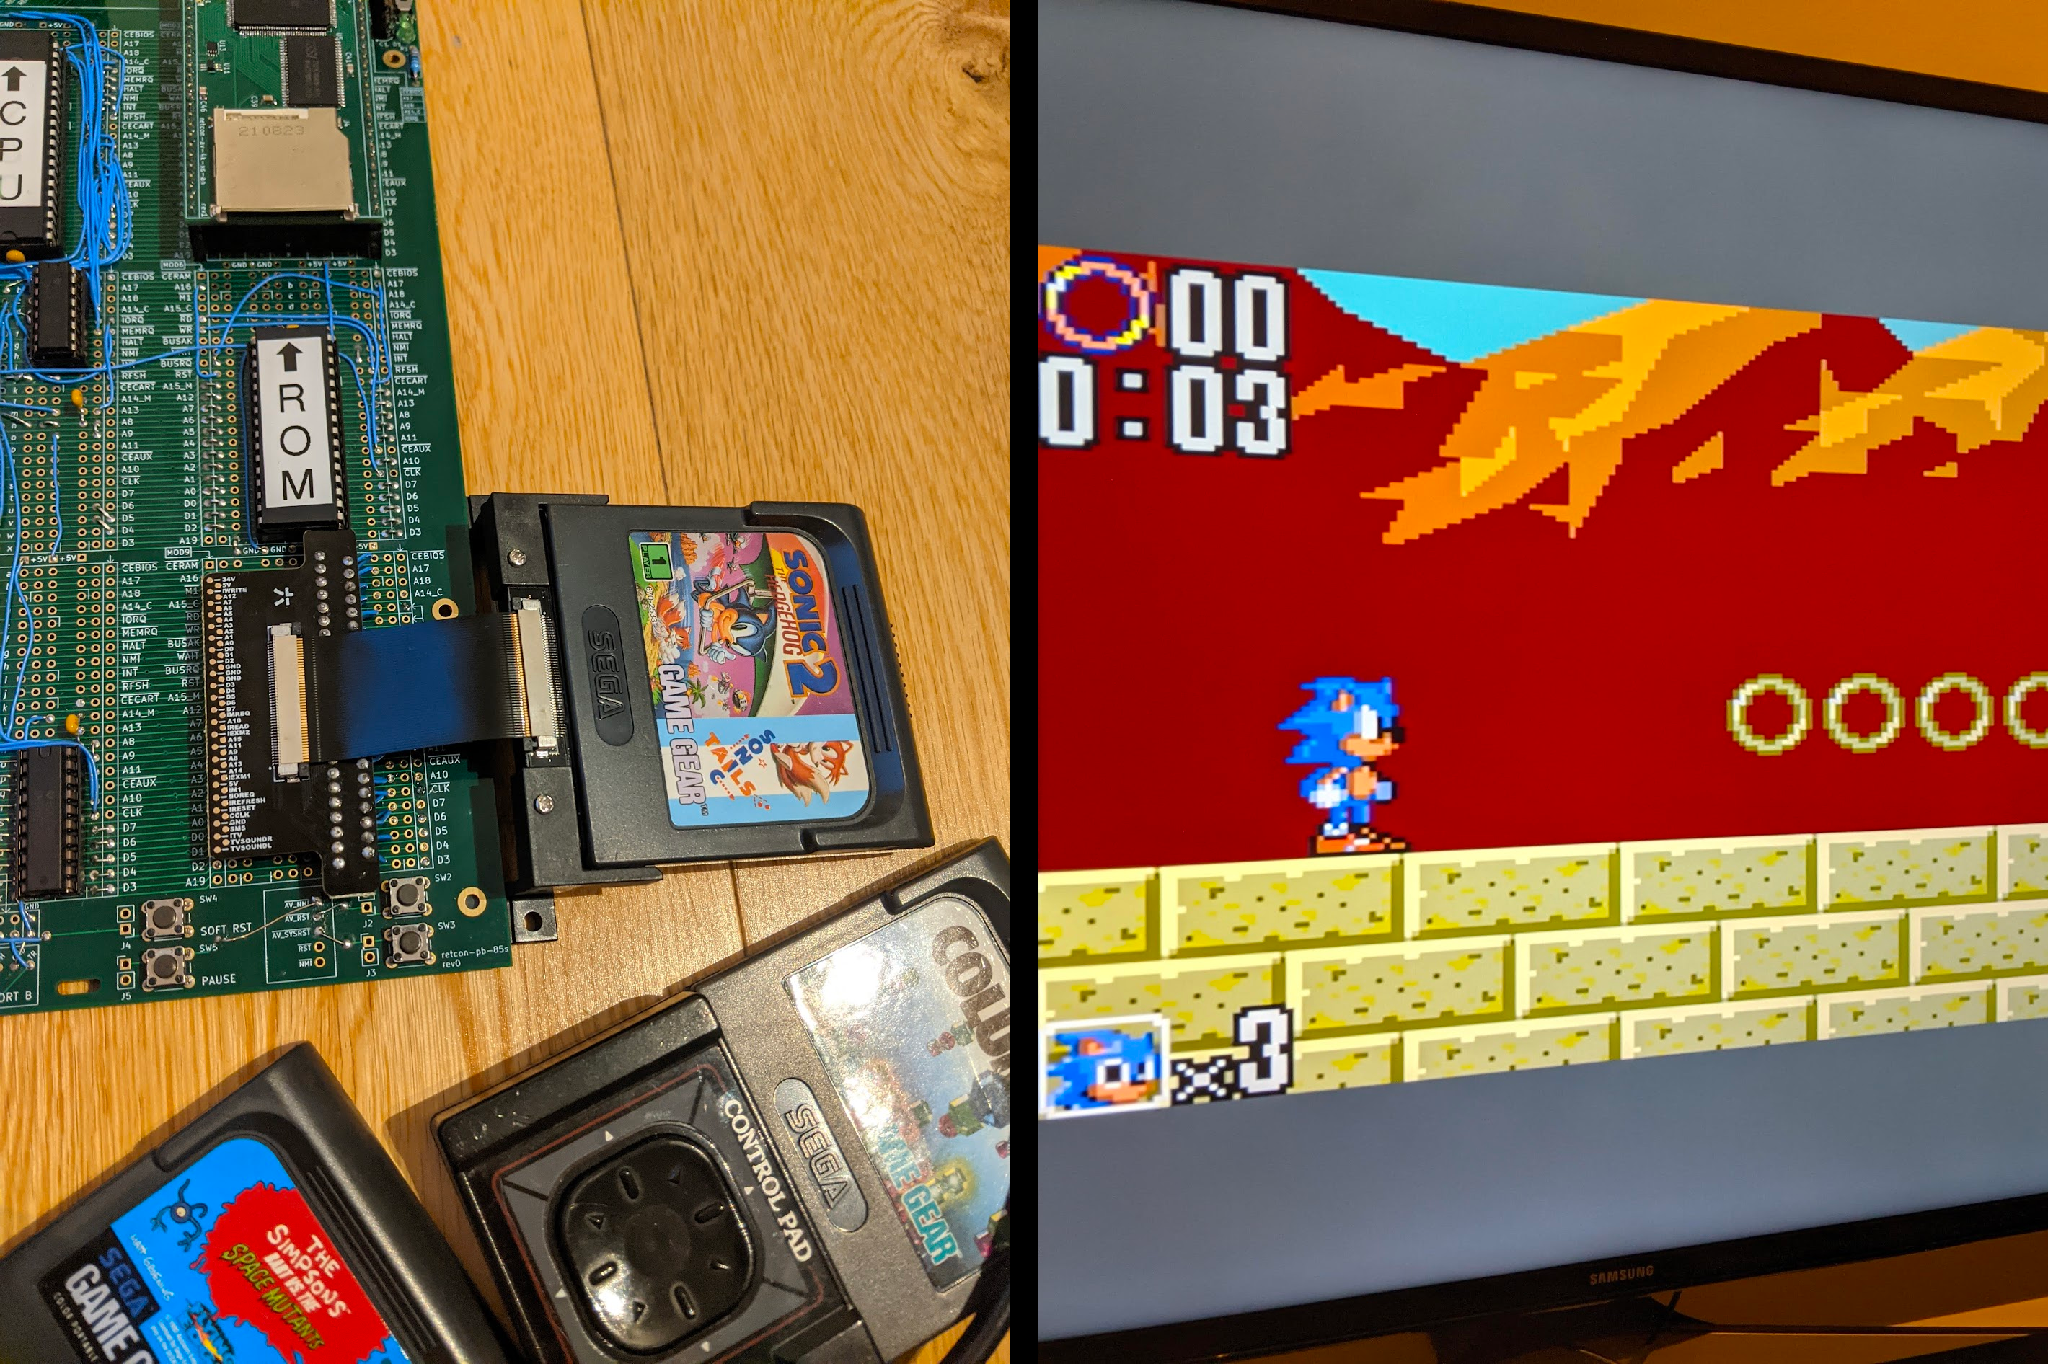 Game Gear cartridge slot wired into Retcon Project Board and Sonic the Hedgehog playing on the TV